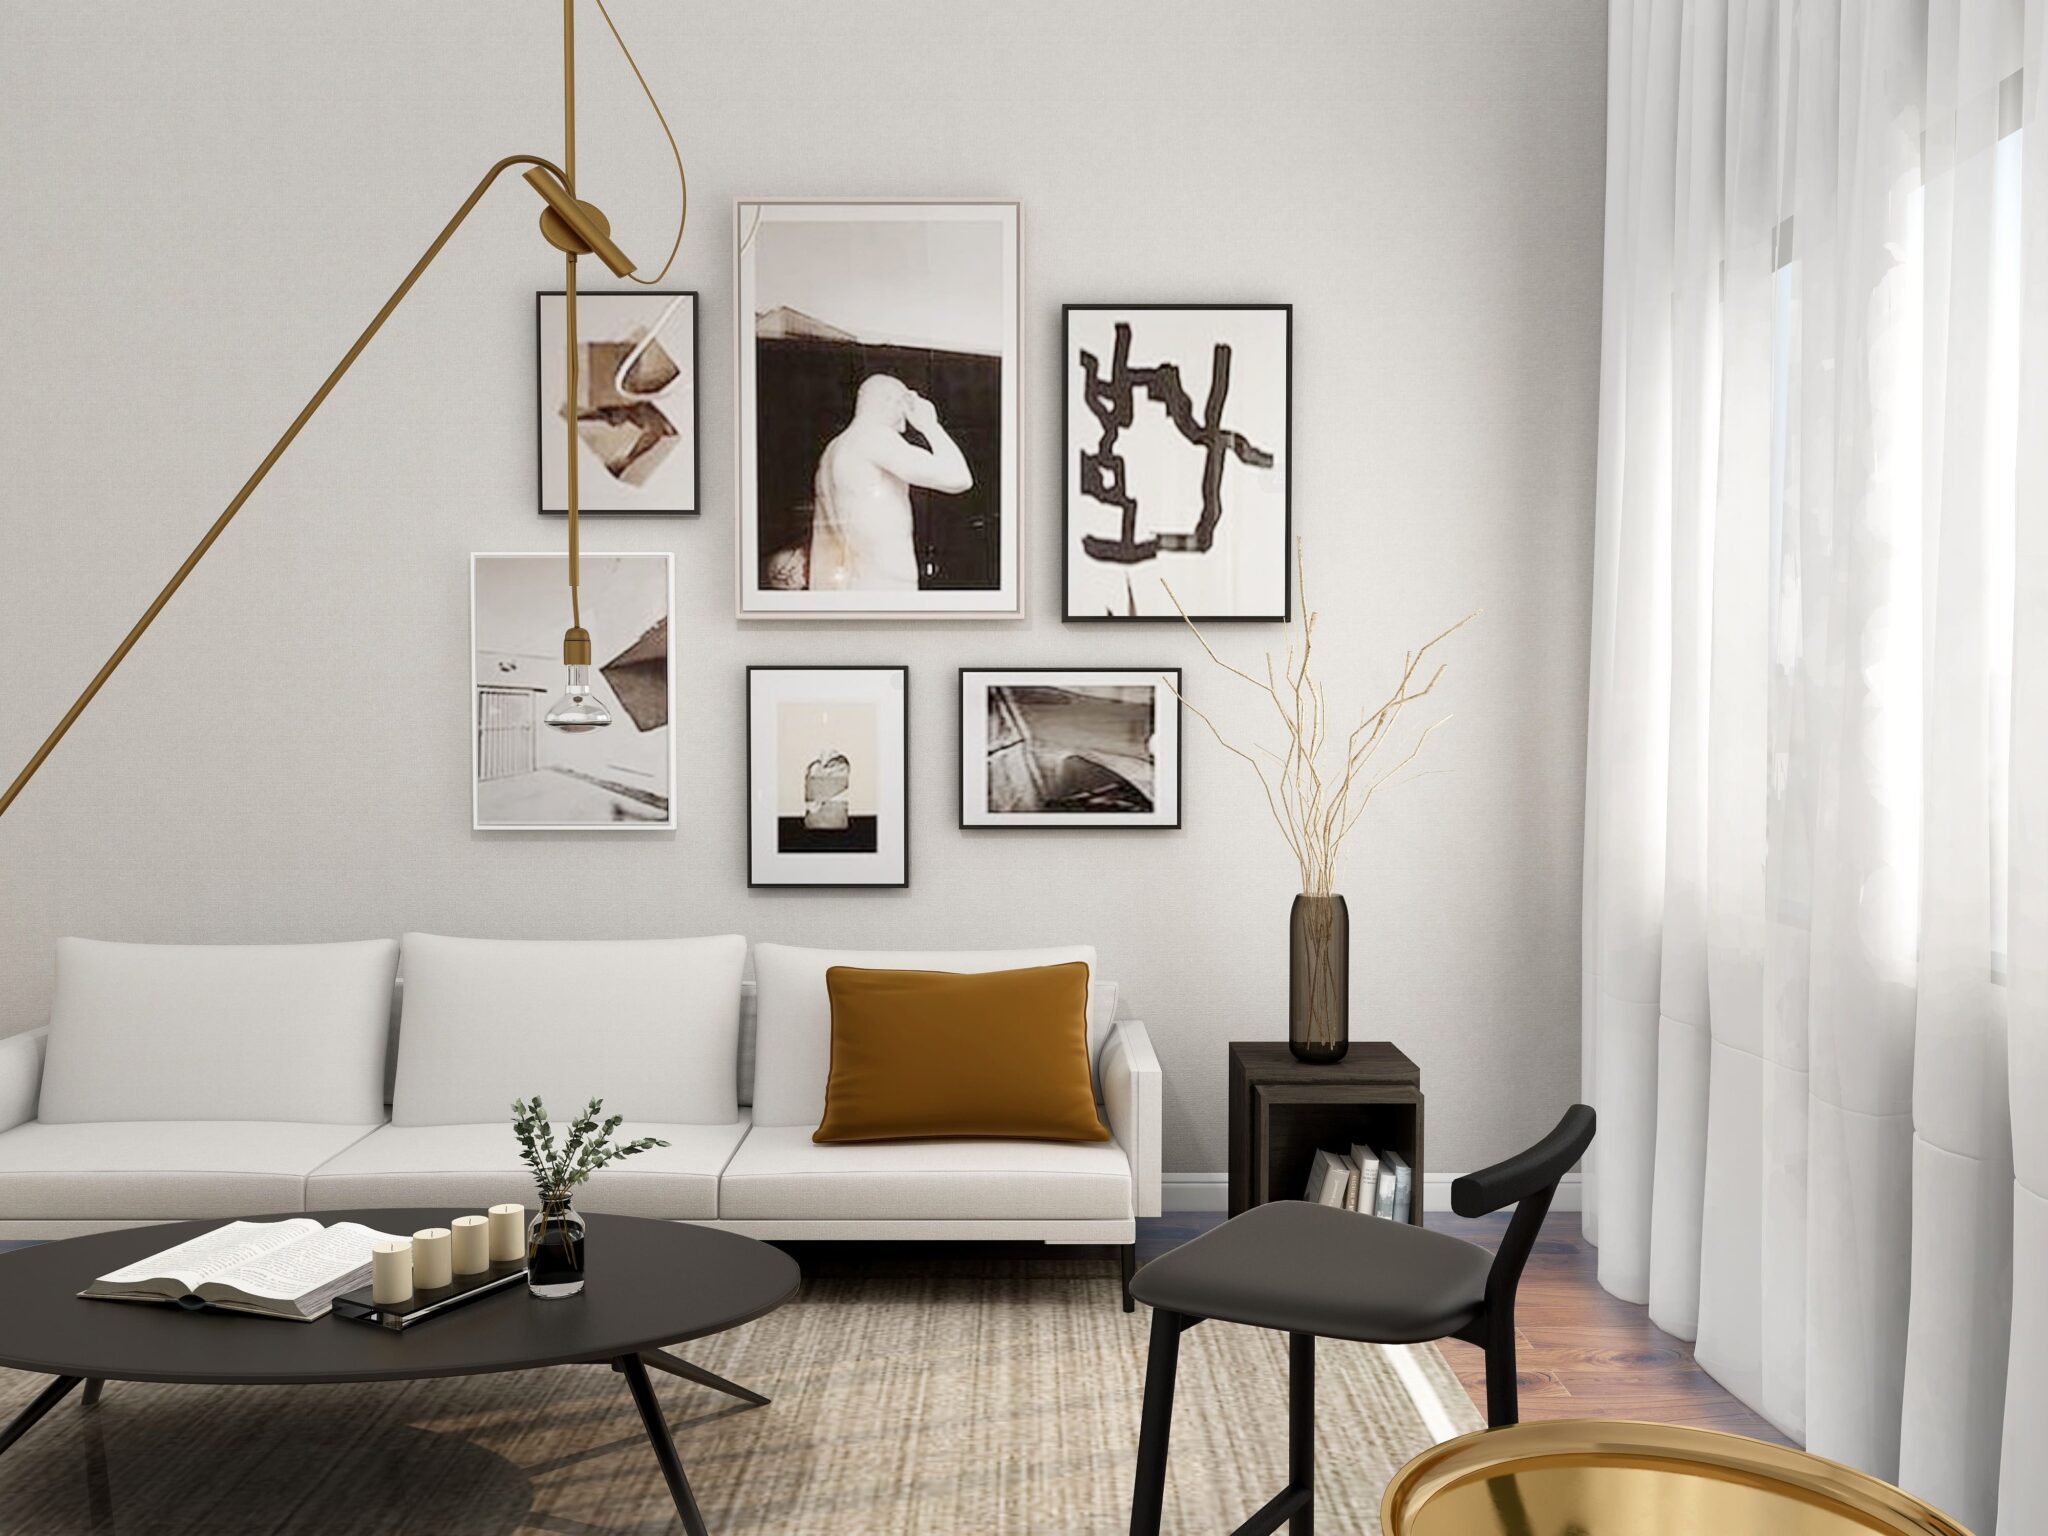 Lounge with graphic wall art and white couch.